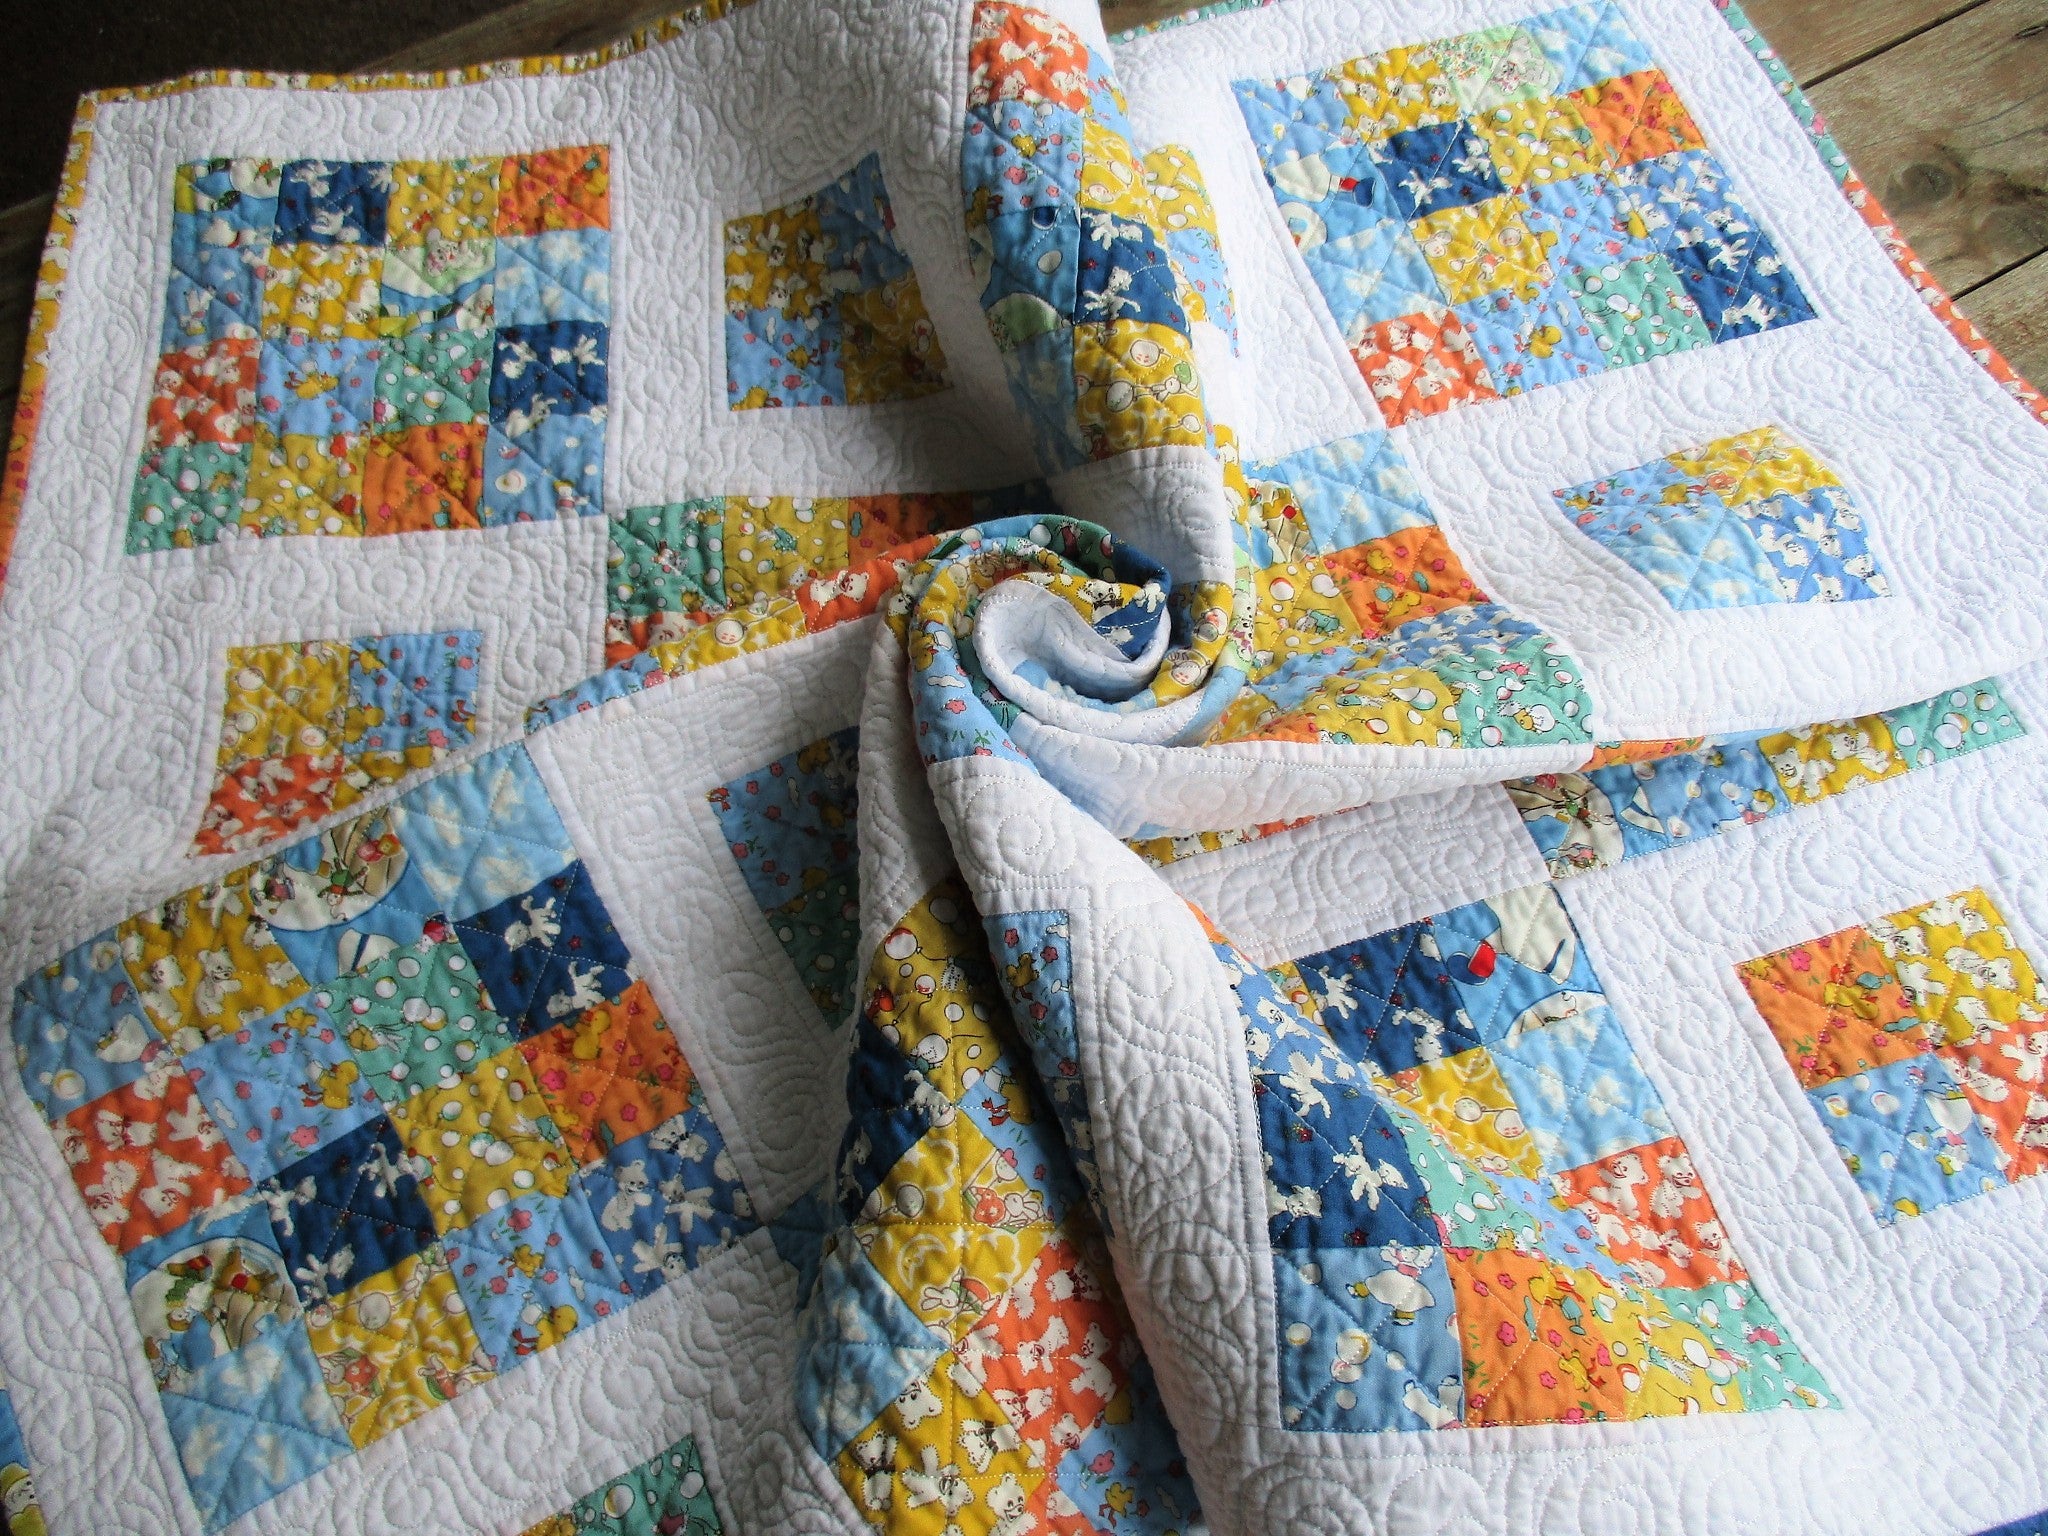 Patchwork baby quilts made with quality and care. Find one-of-a-kind creations at Momma Bears Quilts.